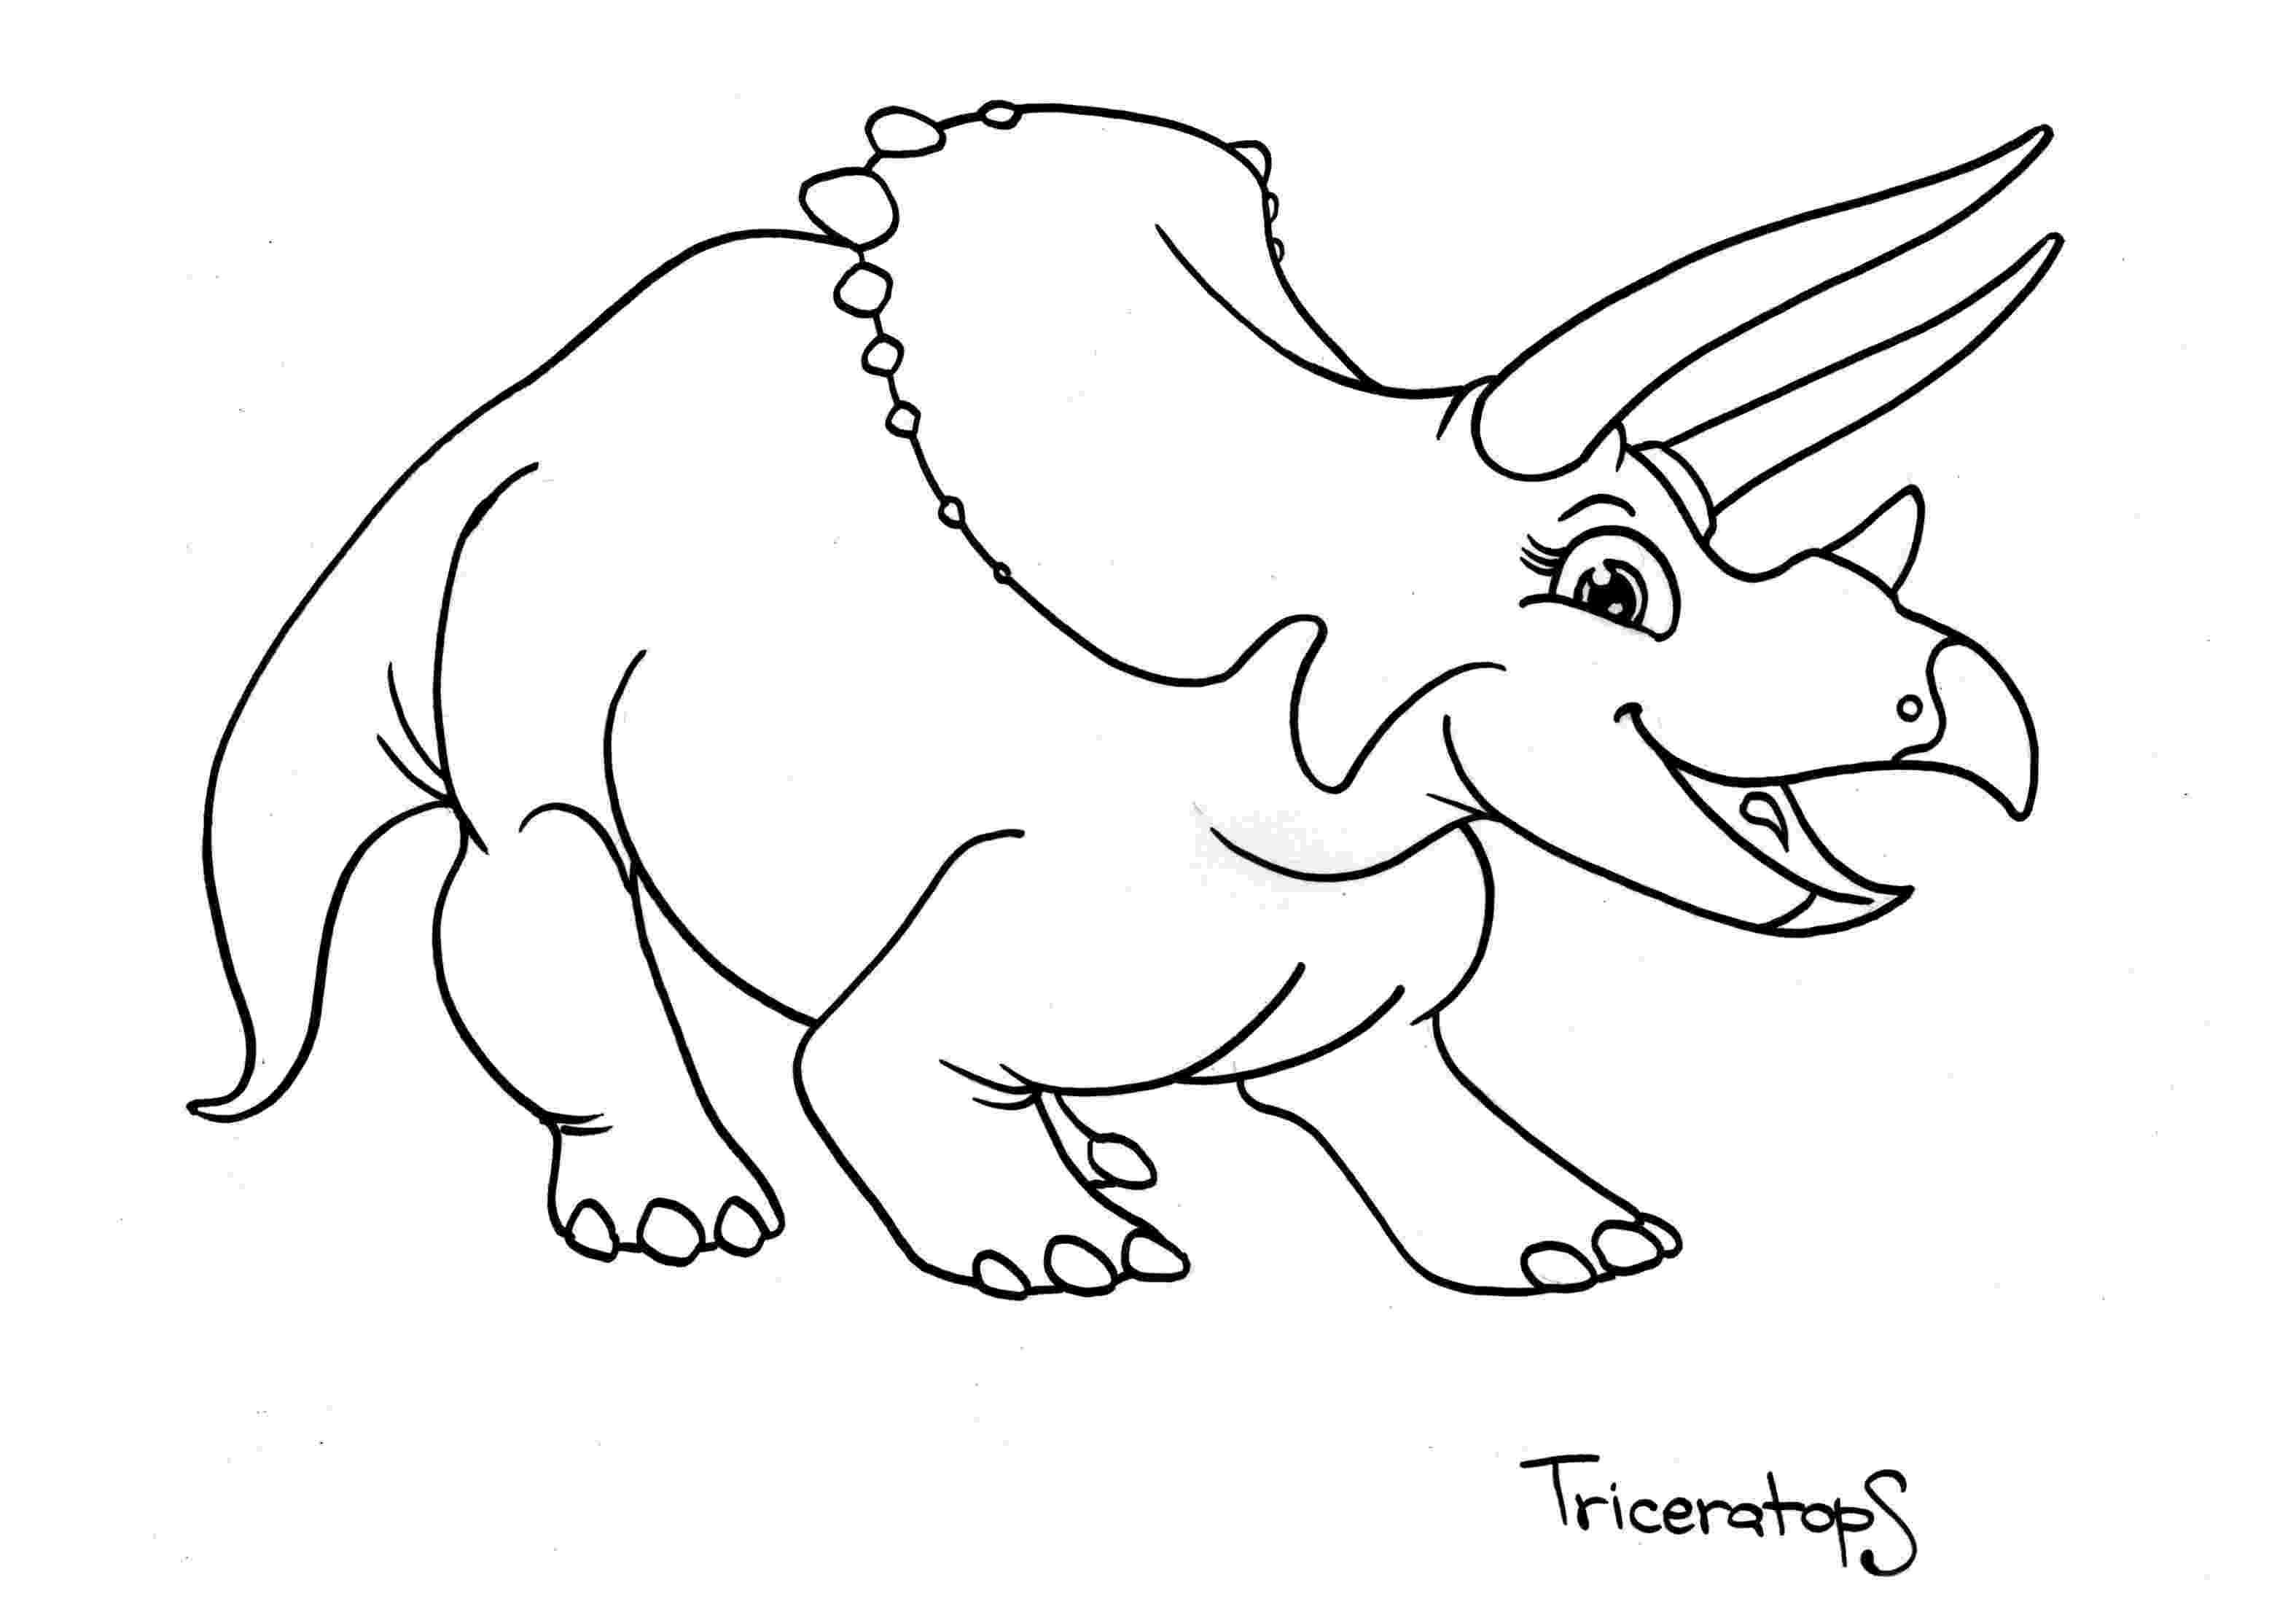 dinosaur images to print dinosaur coloring pages free printable pictures coloring print to images dinosaur 